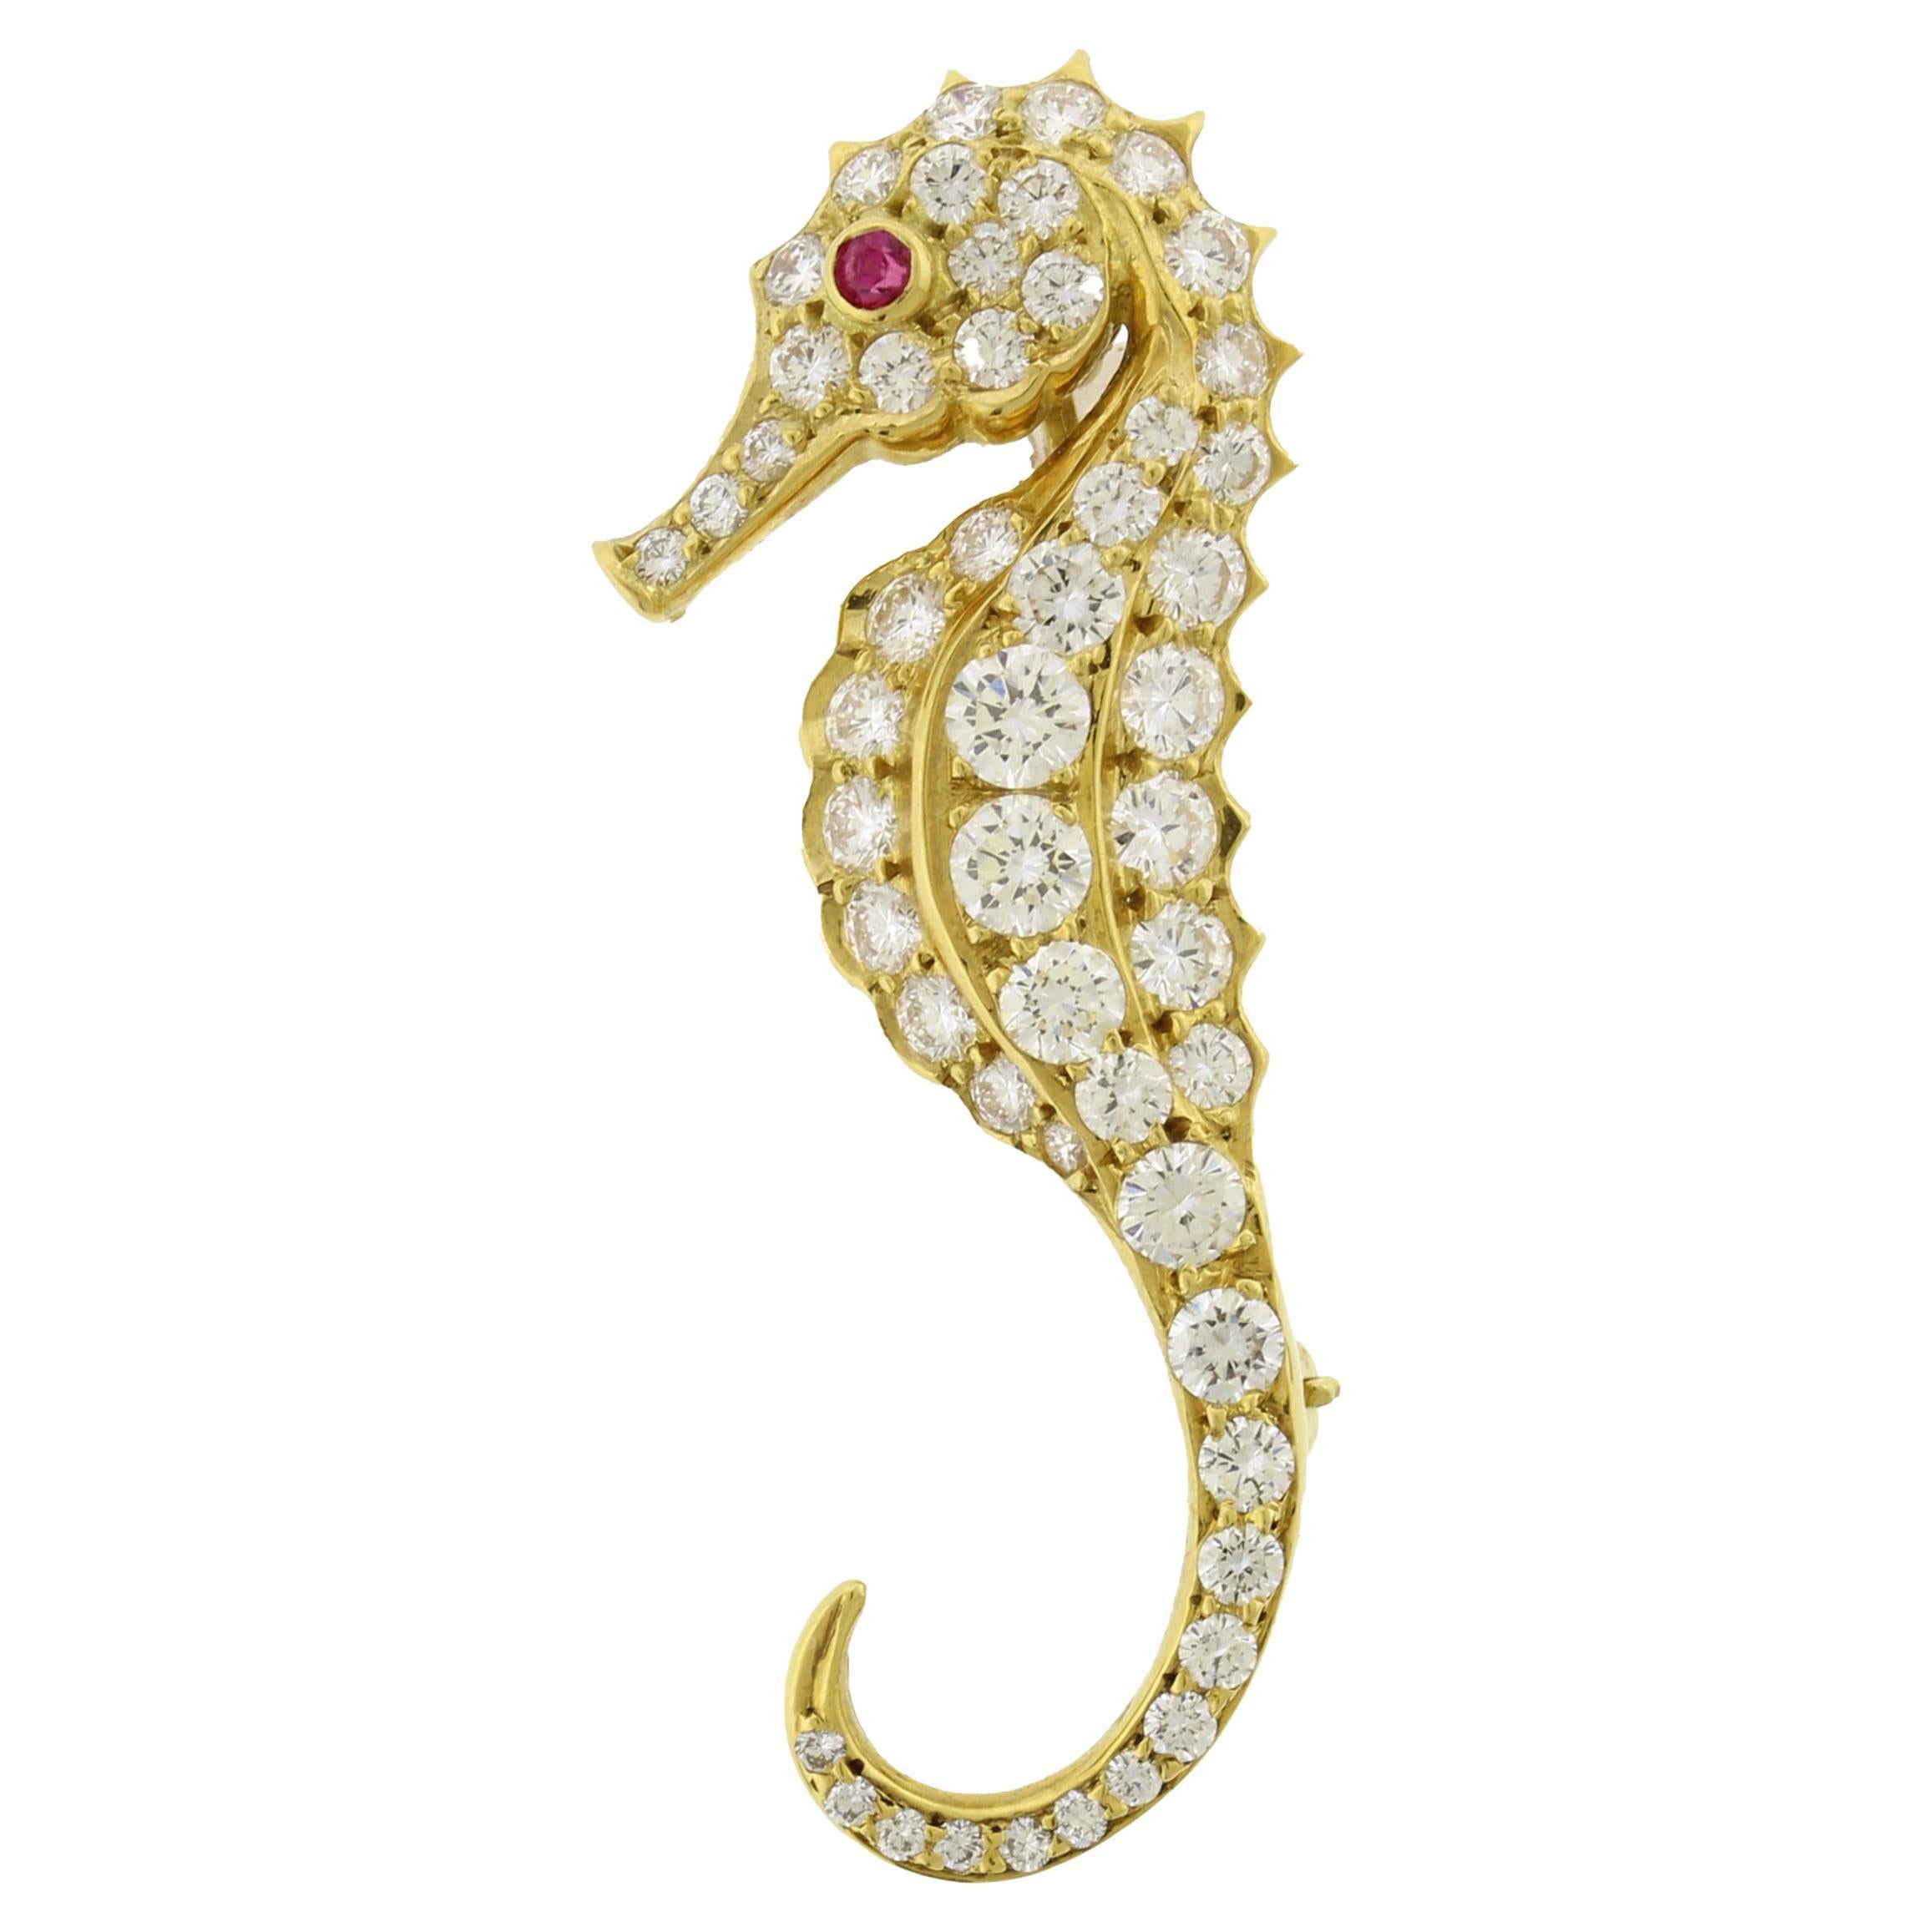 Diamond and Ruby Seahorse Brooch by Pampillonia Jewelers